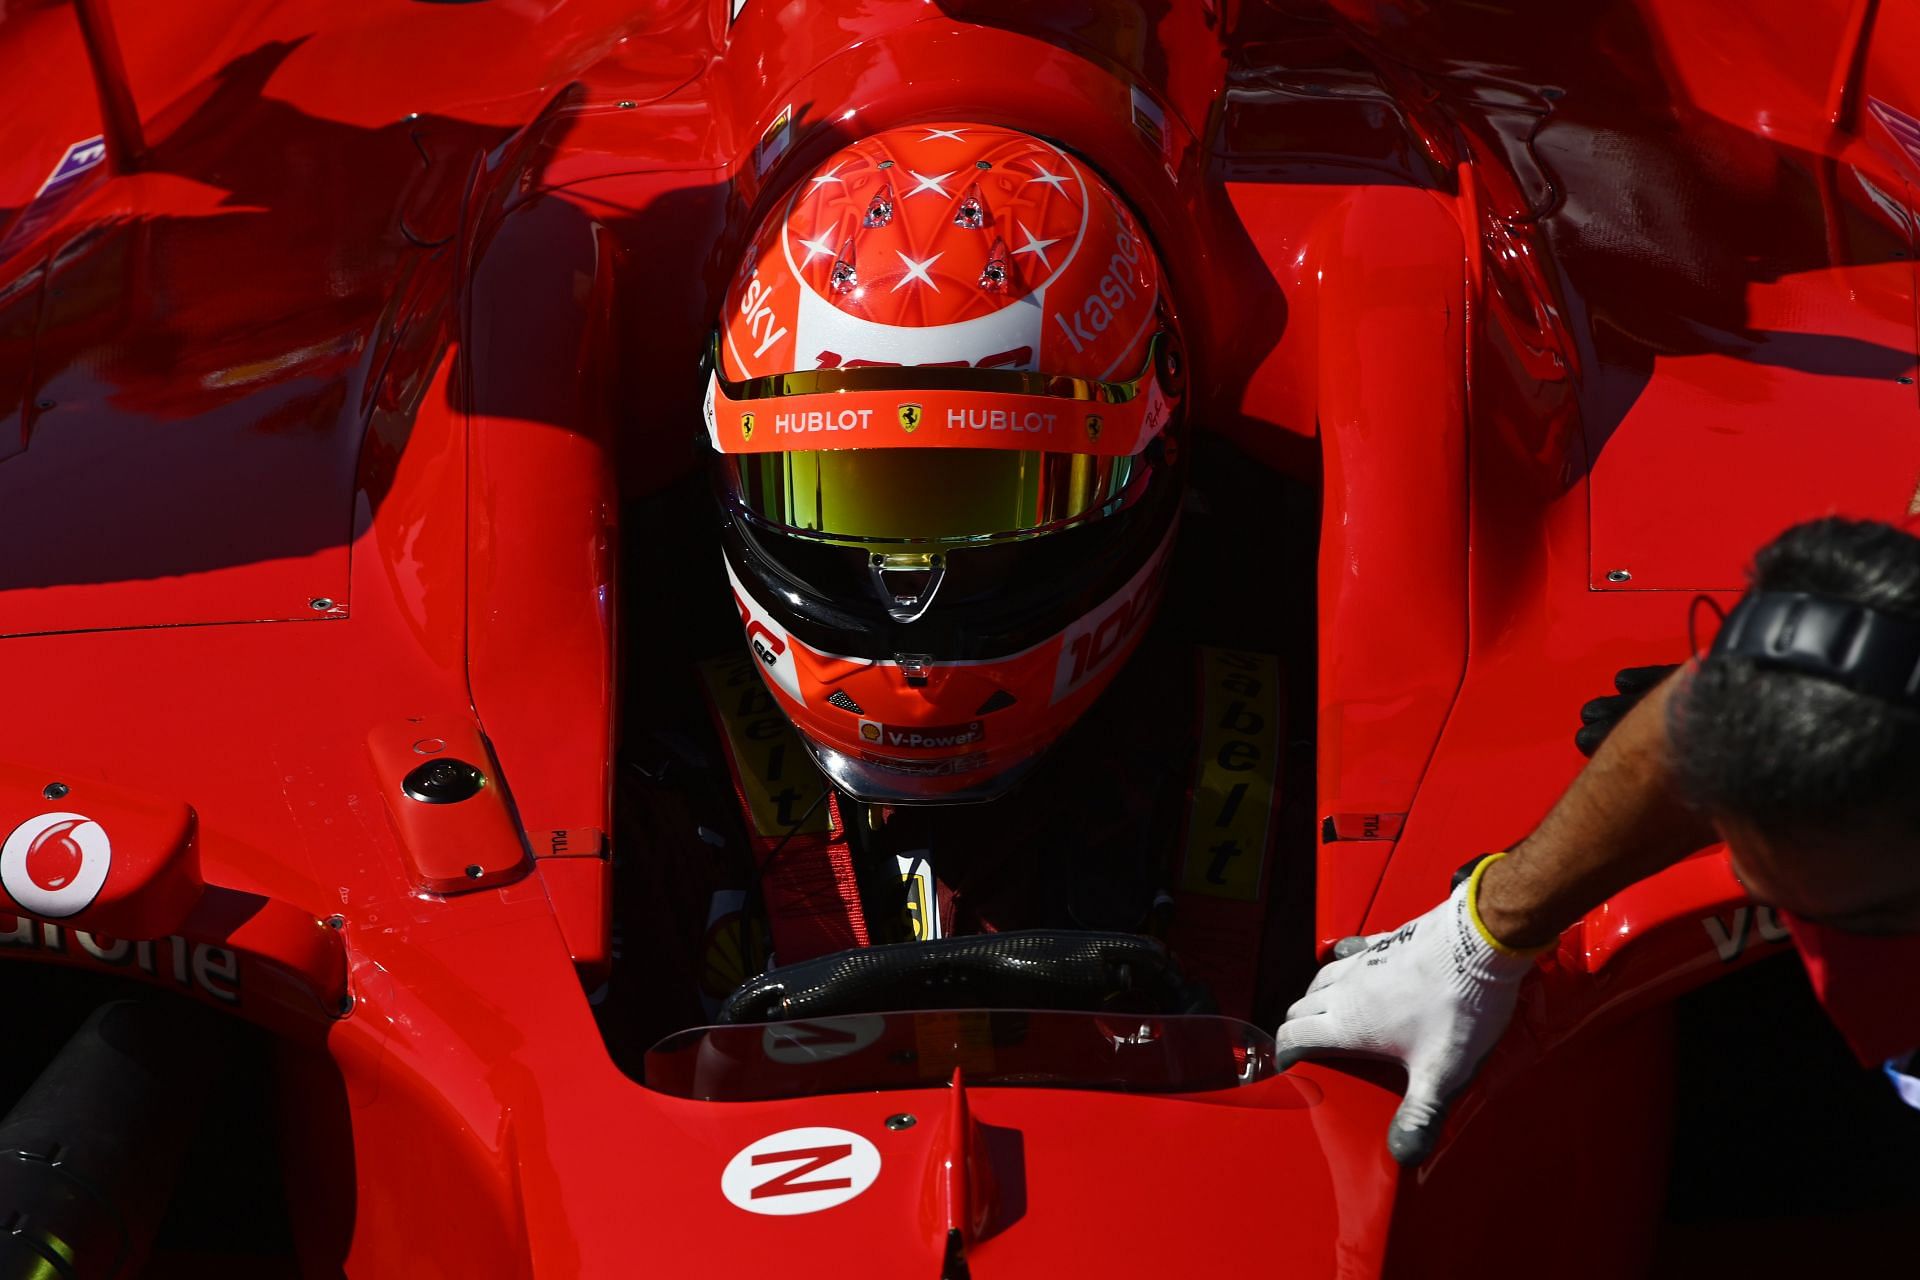 Mick Schumacher of Germany prepares to drive the Ferrari F2004 of his father Michael Schumacher before the 2020 Tuscany GP